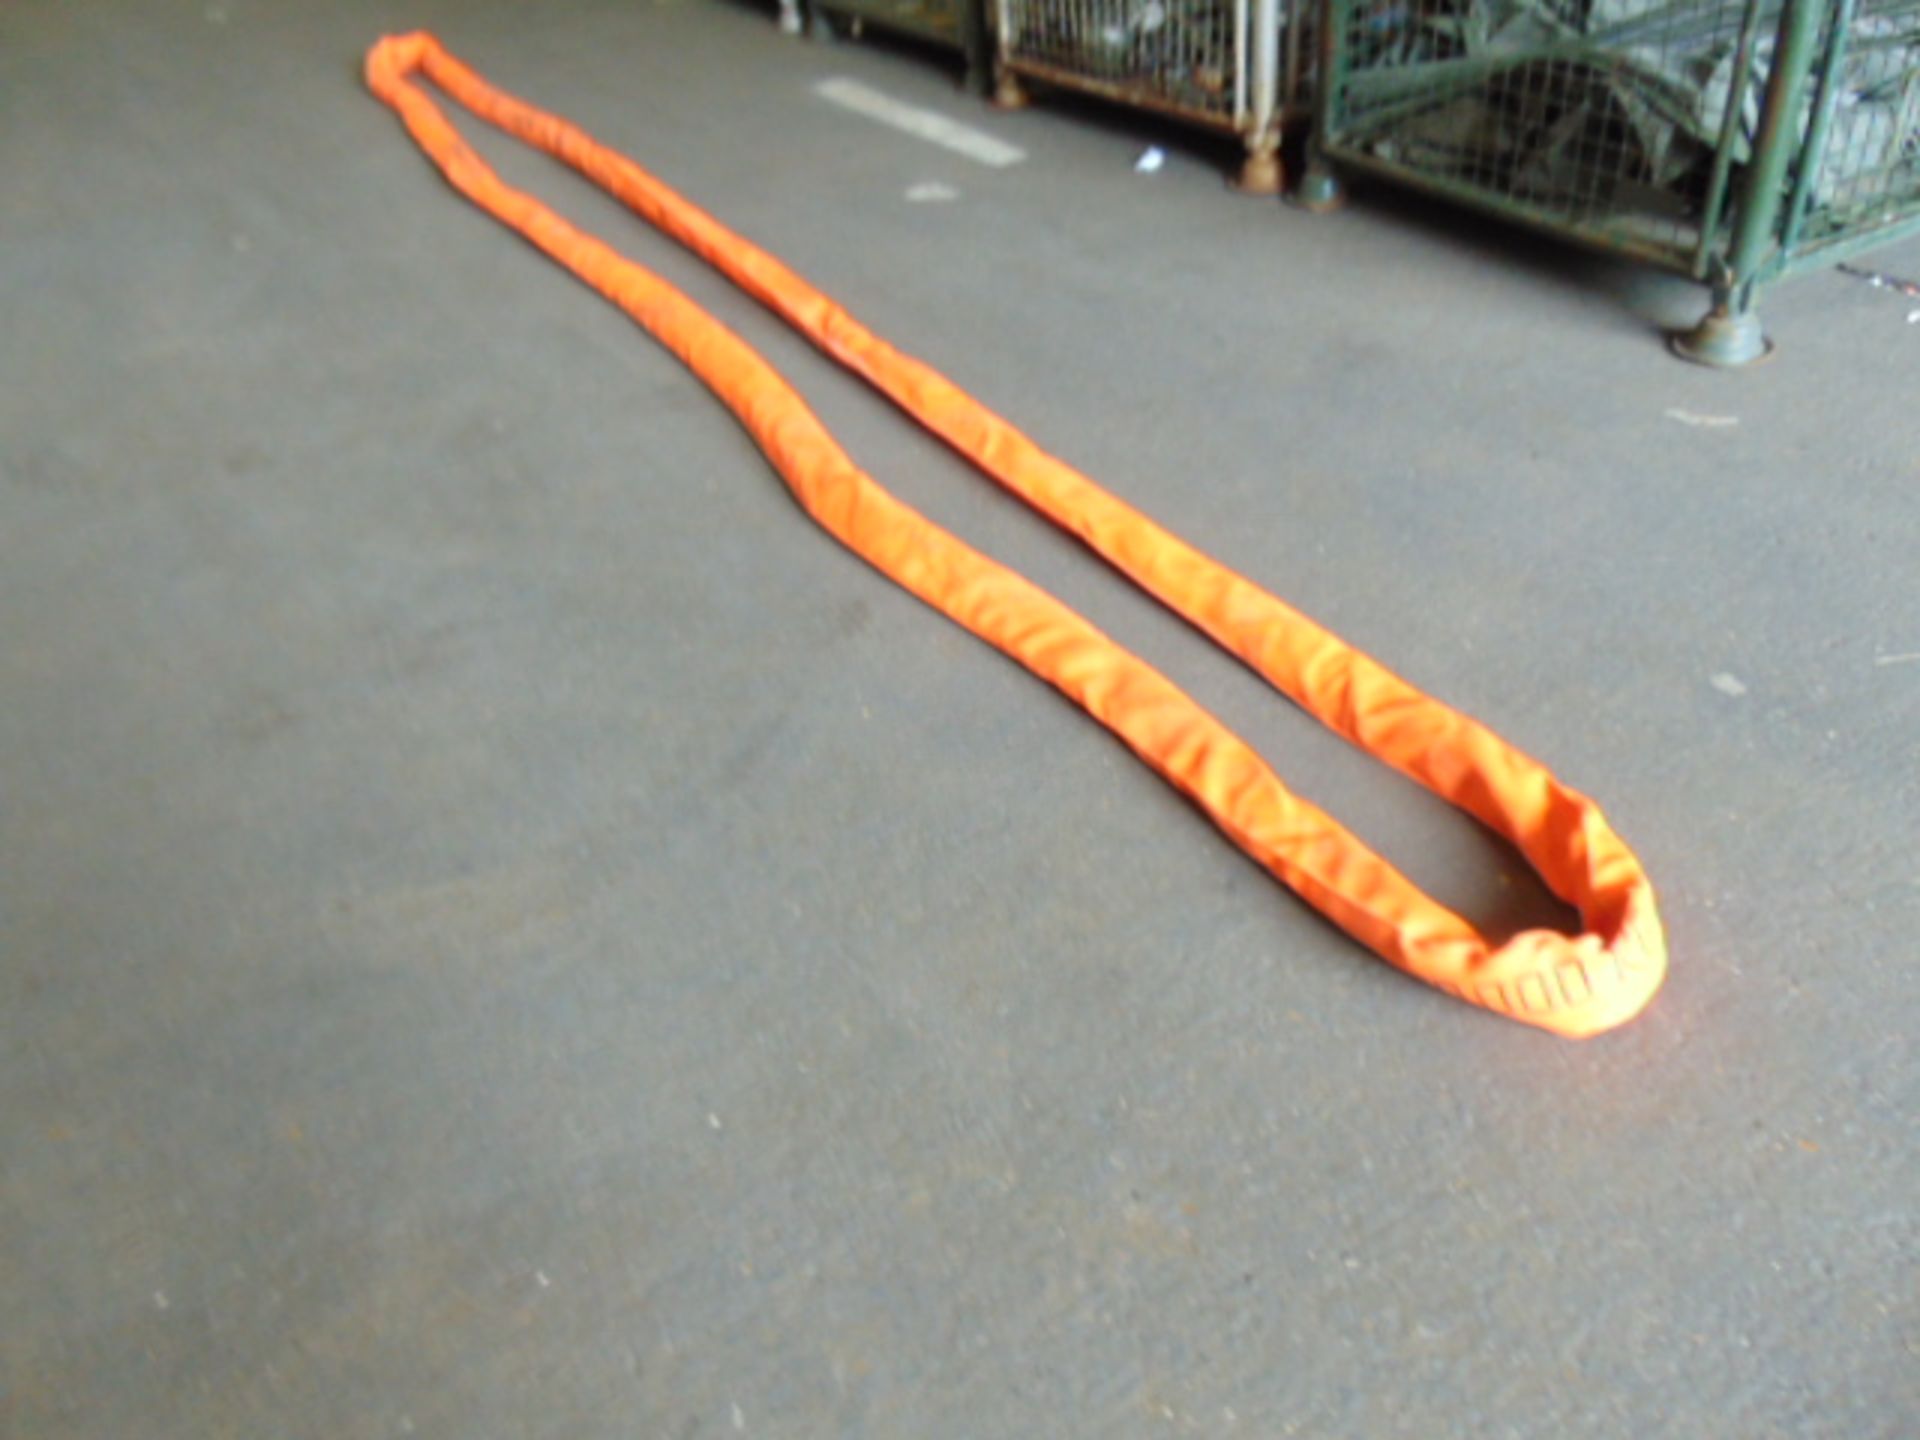 New Unused SpanSet Magnum 20,000kg Lifting/Recovery Strop from MOD - Image 2 of 7